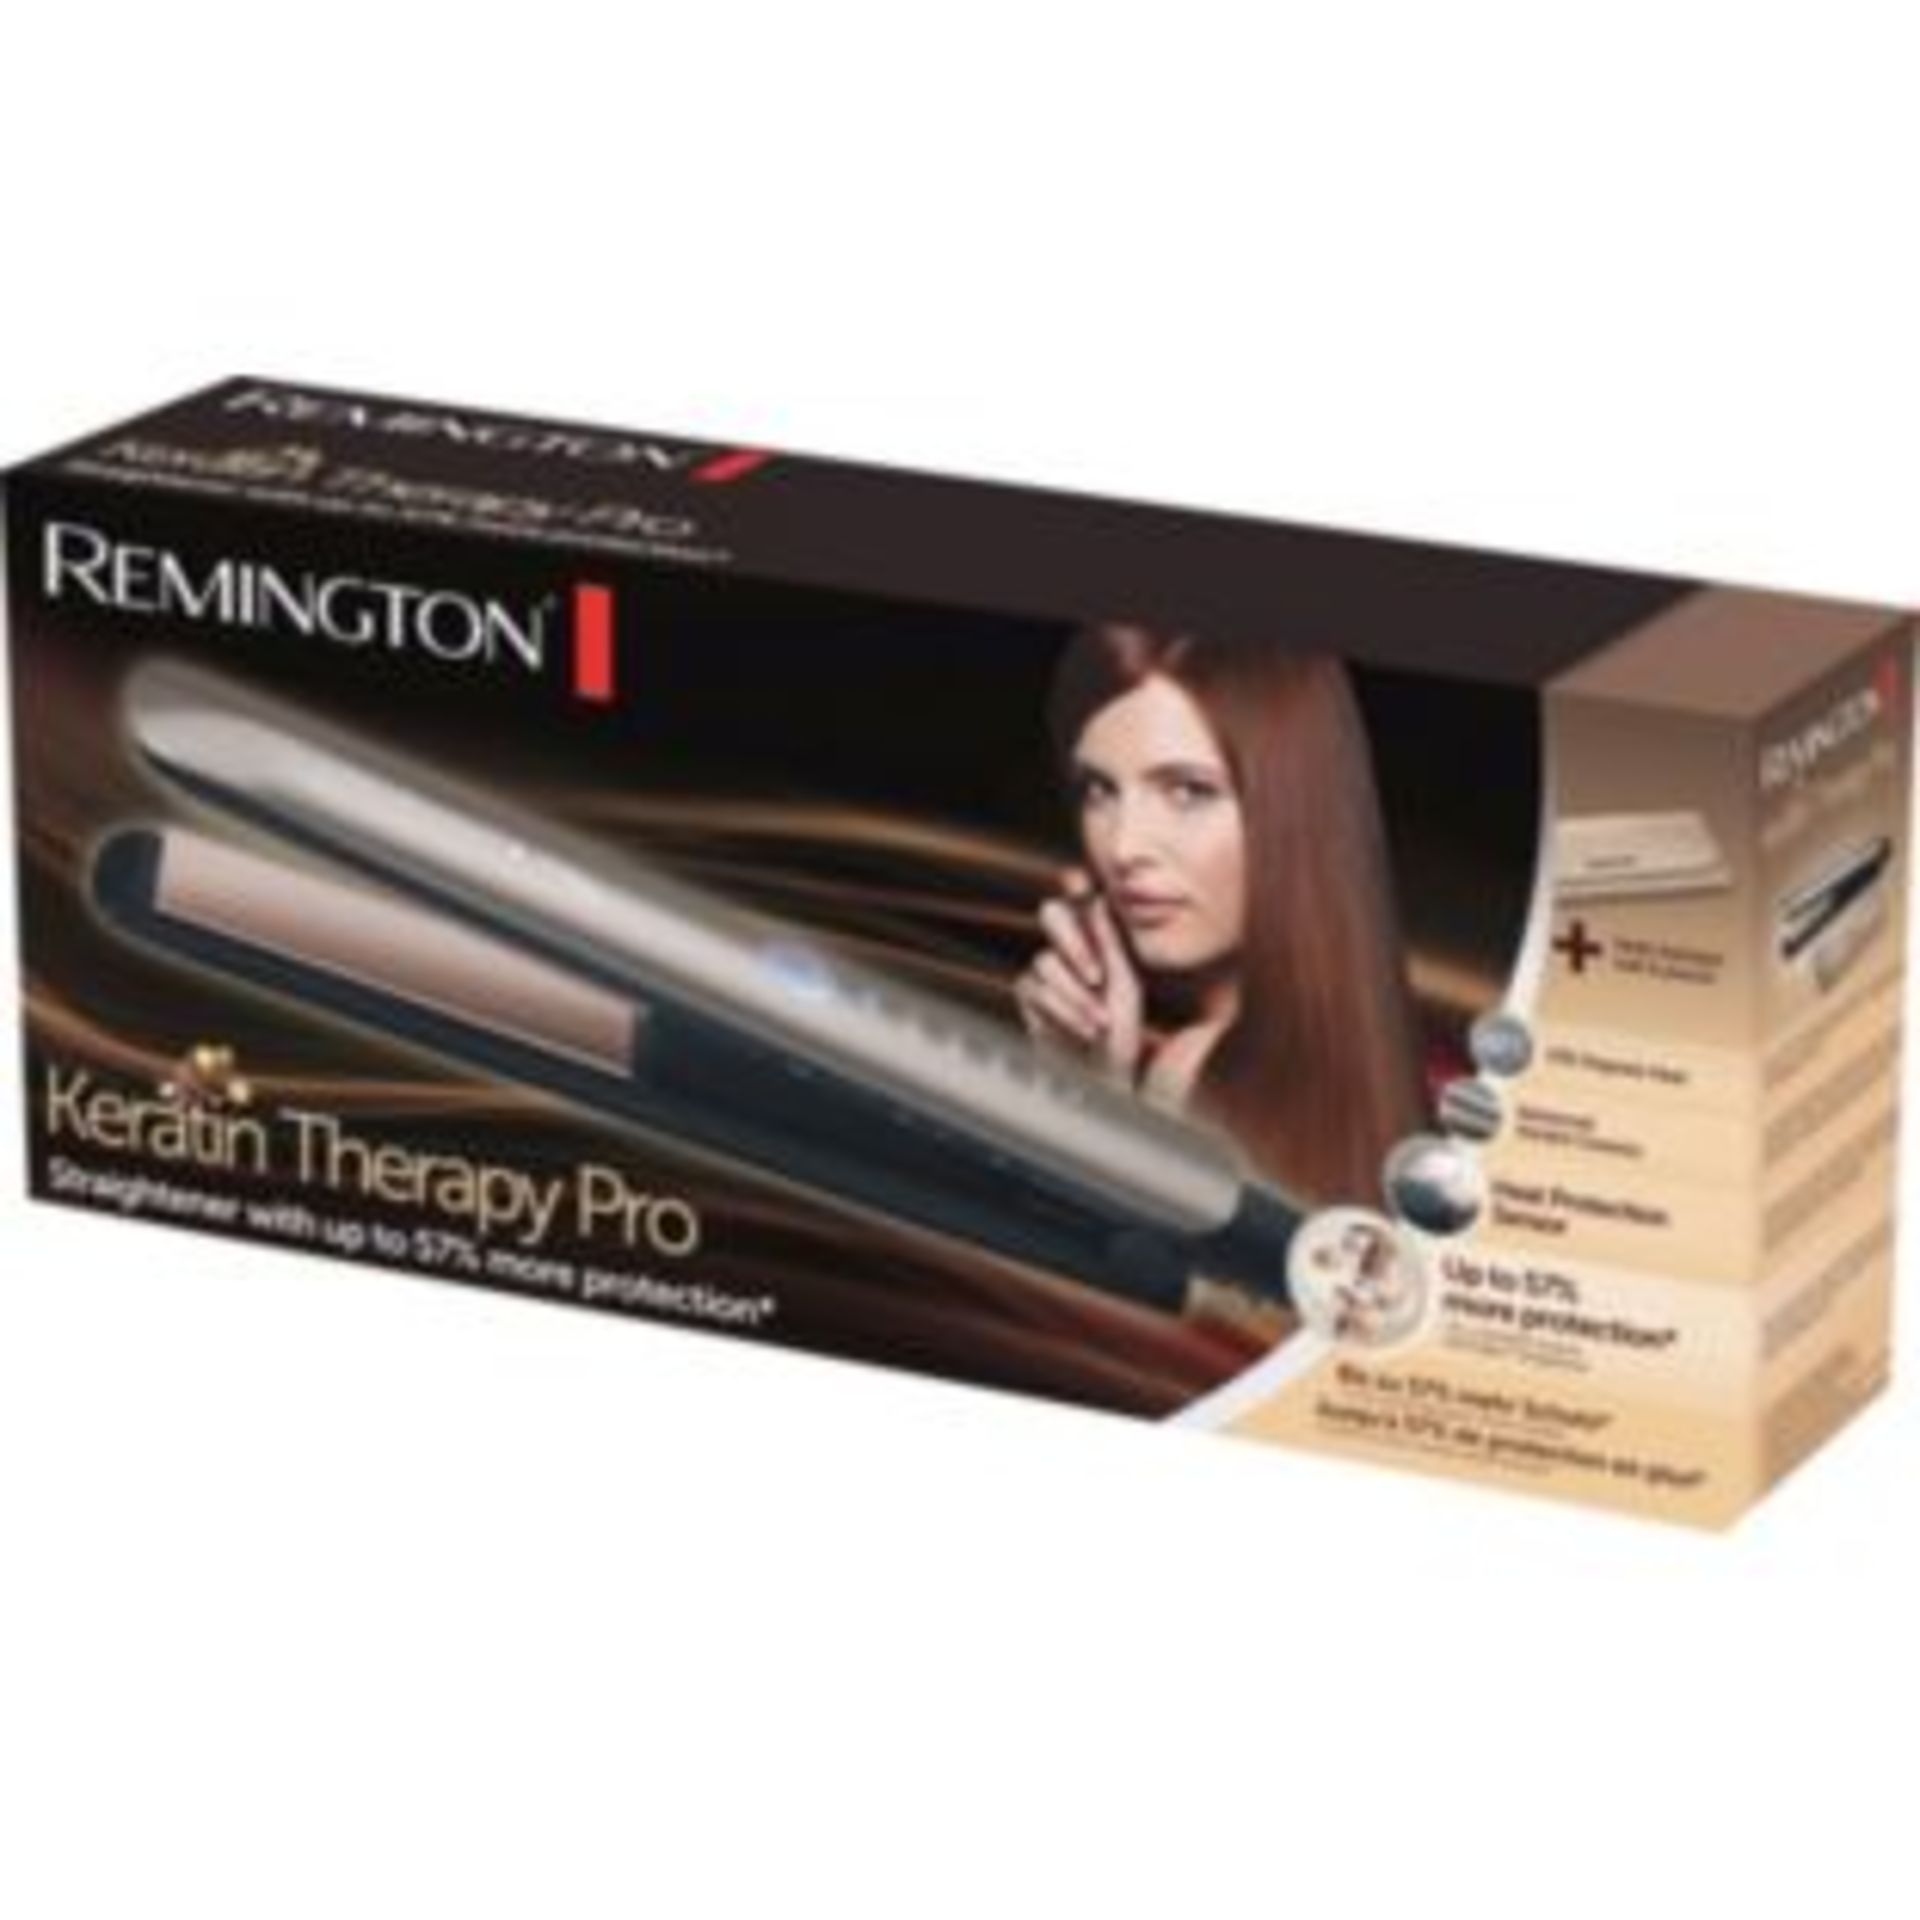 V *TRADE QTY* Brand New Remington Keratin Therapy Pro Straighteners With 57% More Protection (As - Bild 2 aus 2